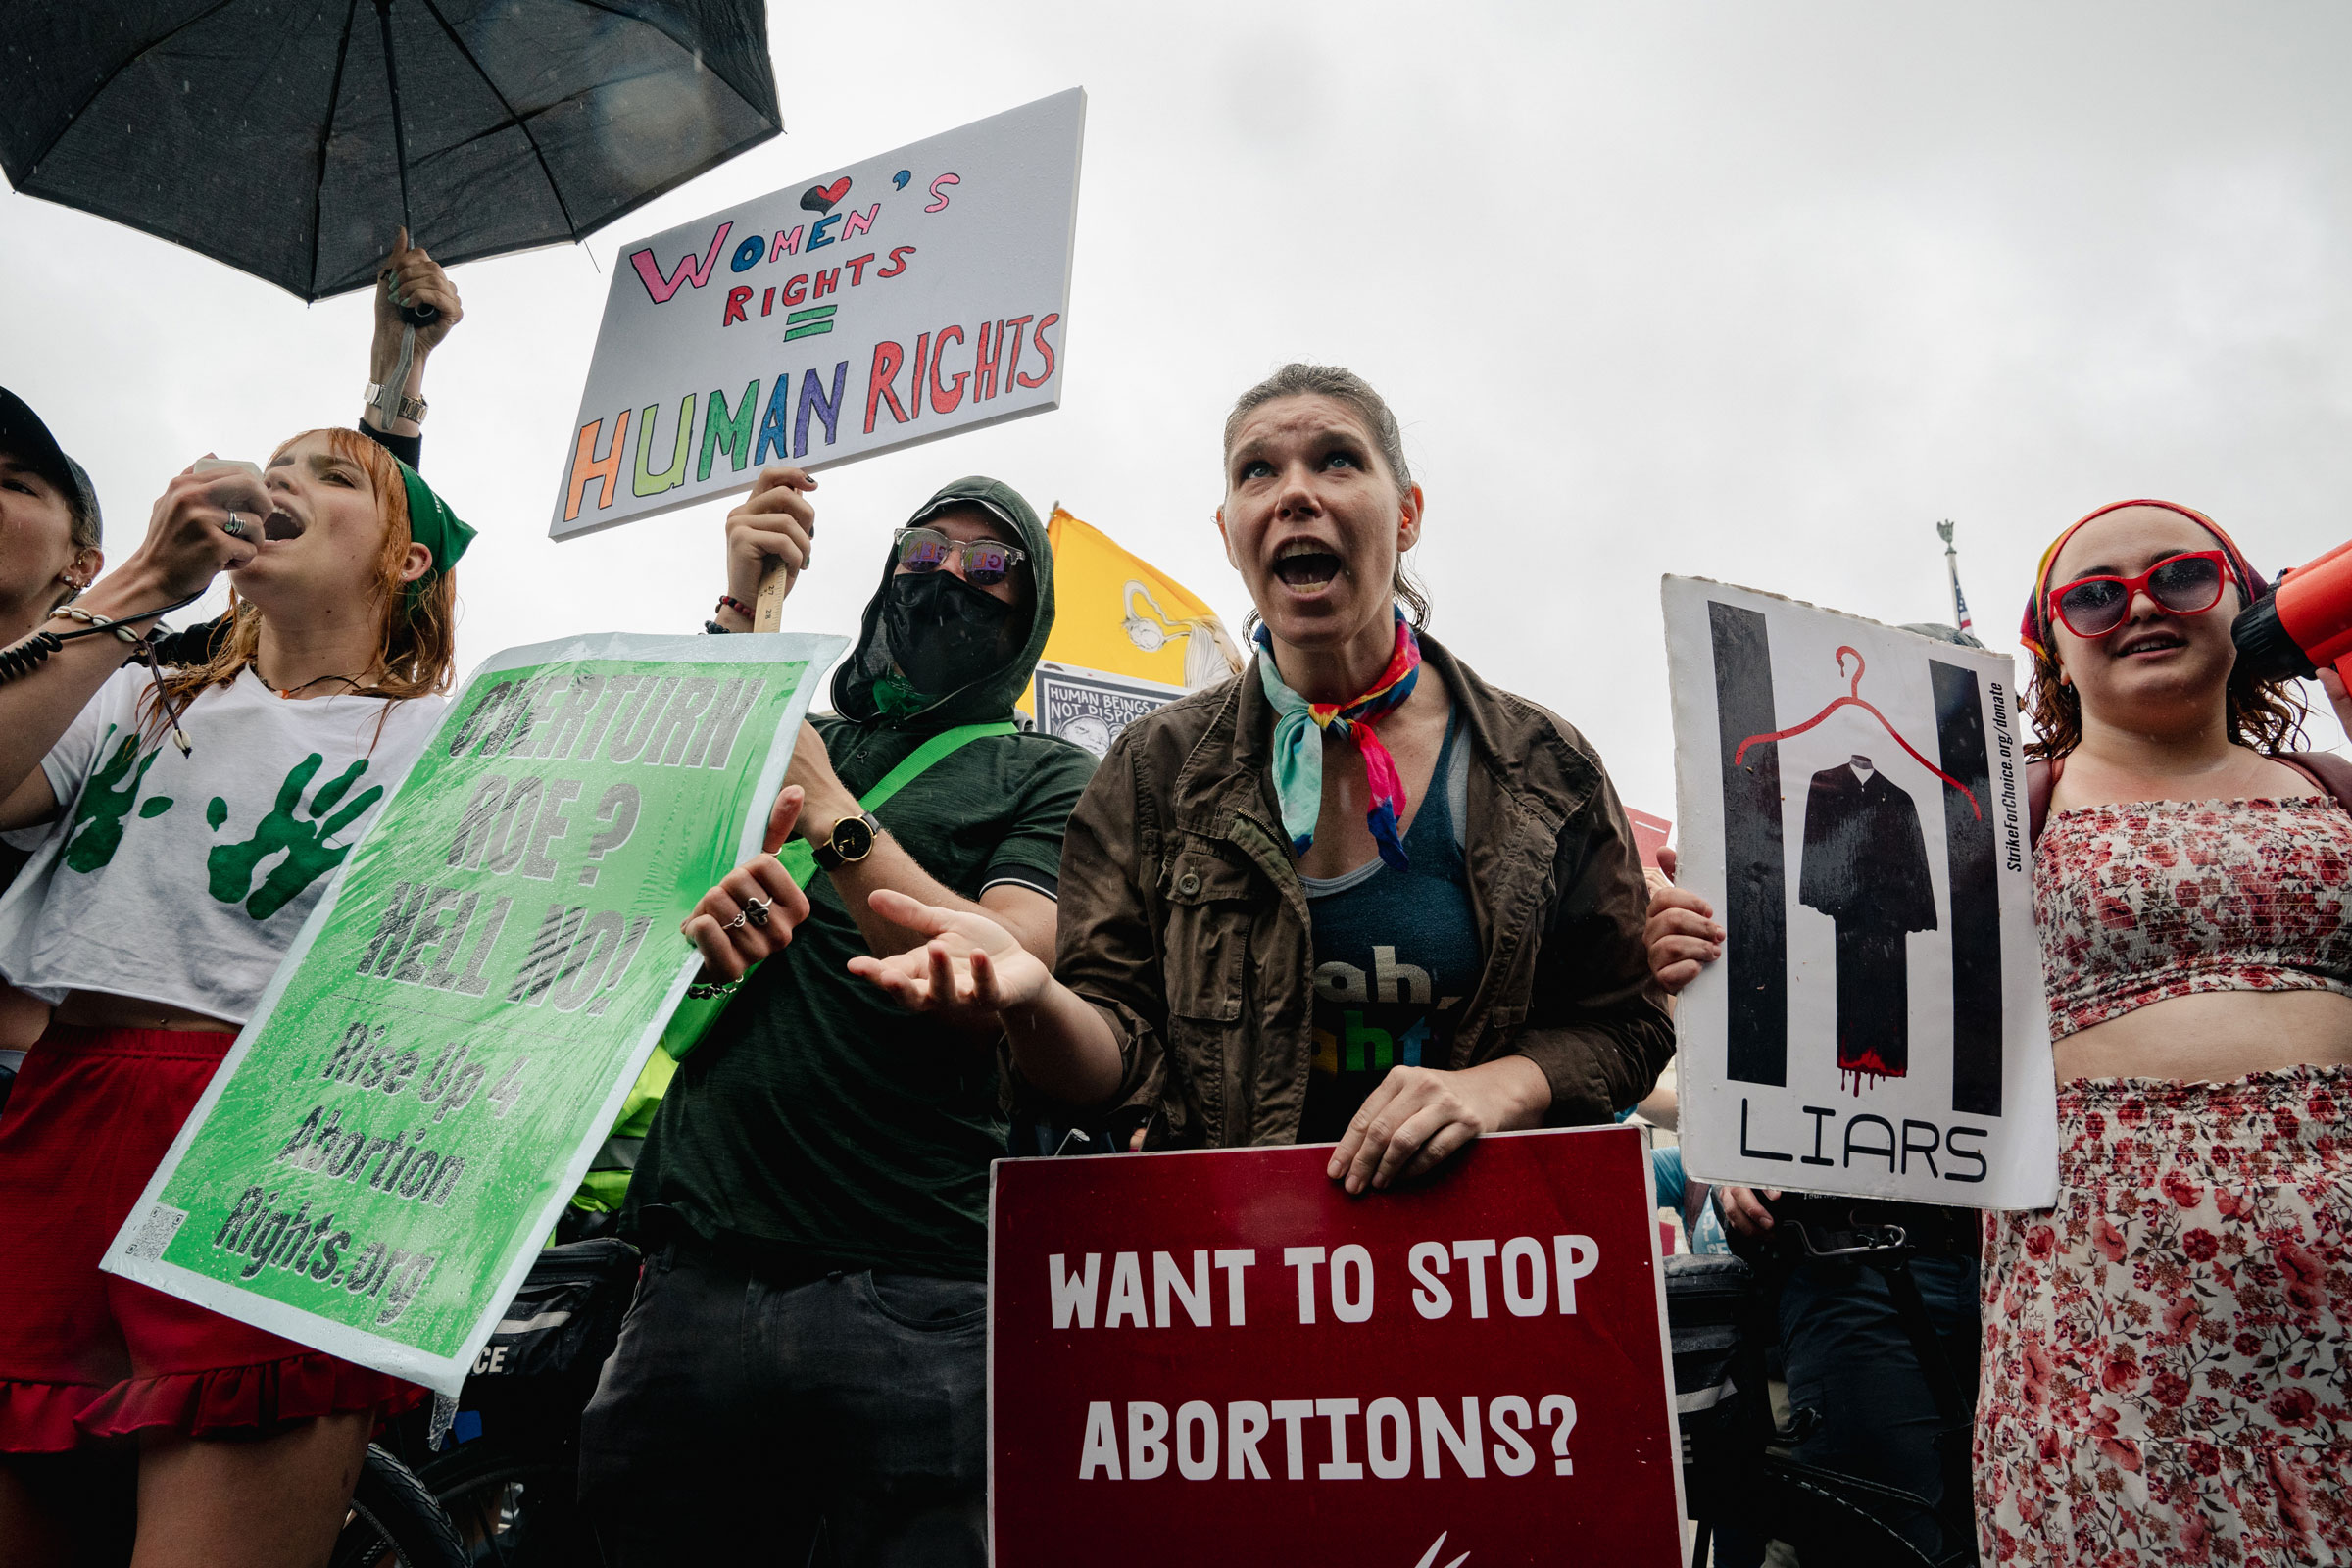 Supporters and opponents of abortion rights demonstrate outside the U.S. Supreme Court Building on June 23, 2022 in Washington, D.C. (Shuran Huang for TIME)